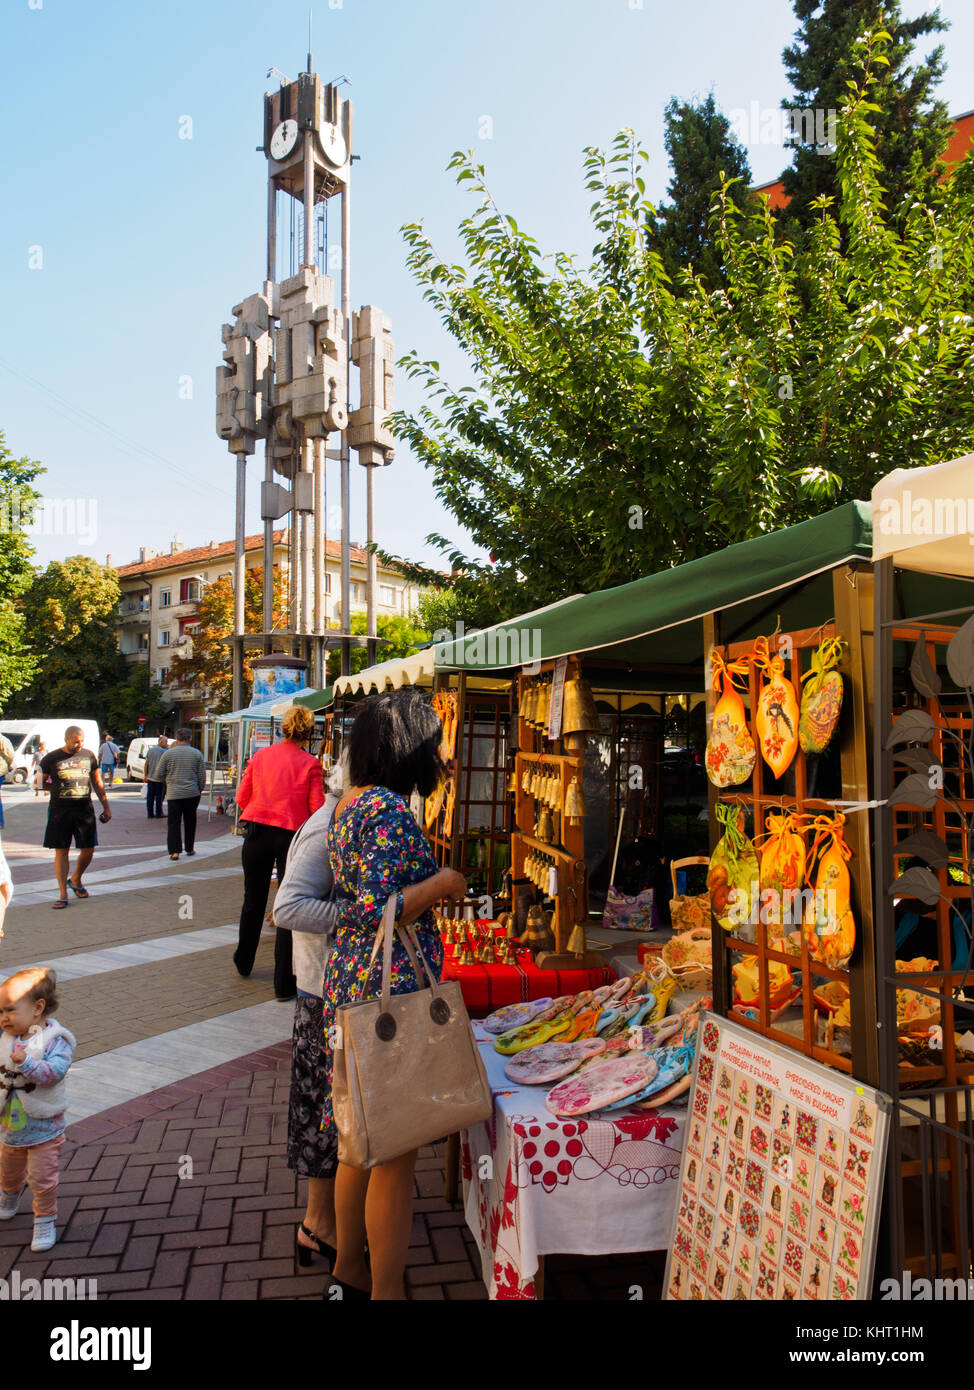 The flea market at Haskovo fair having old mechanic clock tower in the background. Stock Photo